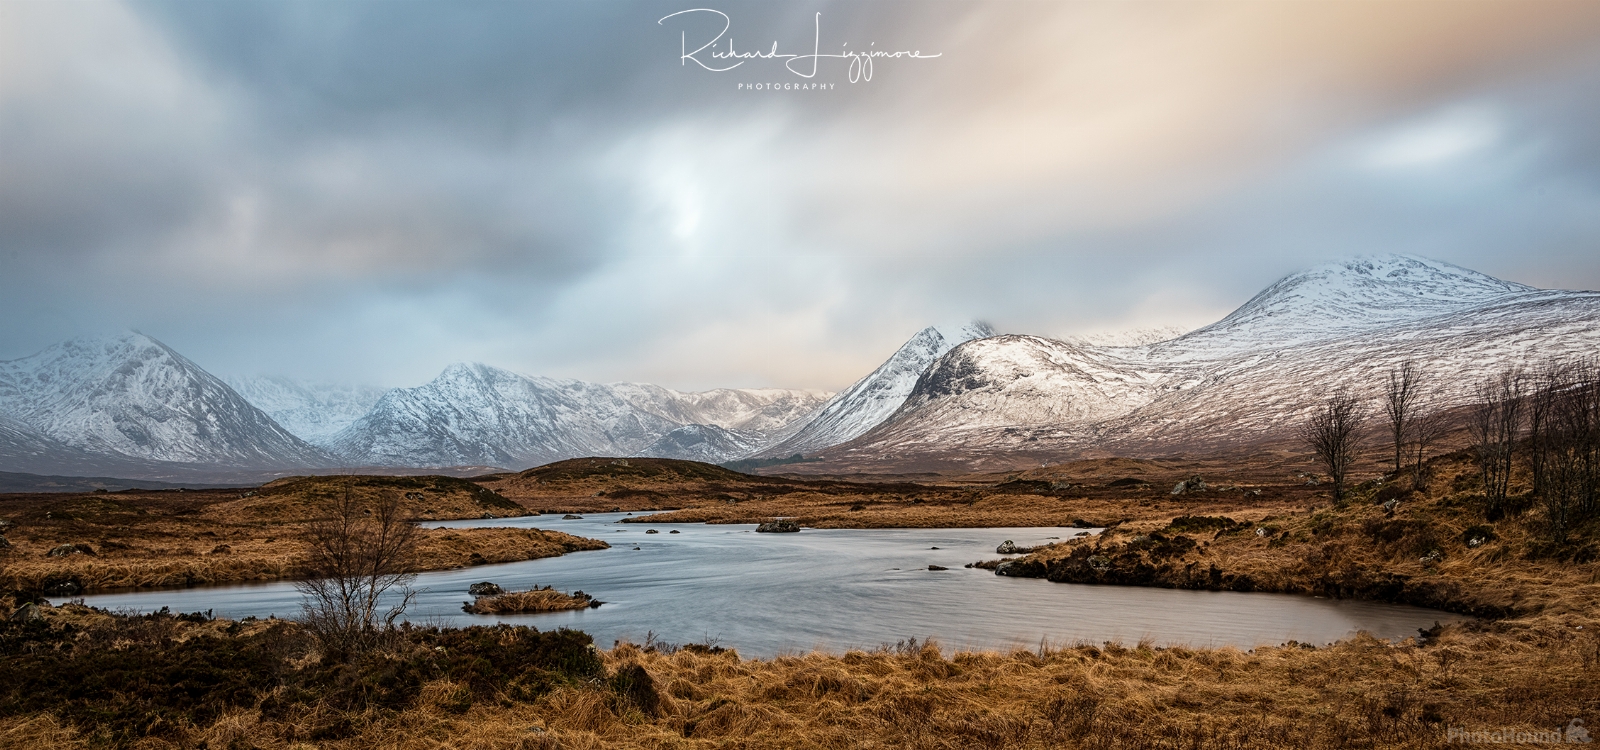 Image of Lochan na h-Achlaise by Richard Lizzimore